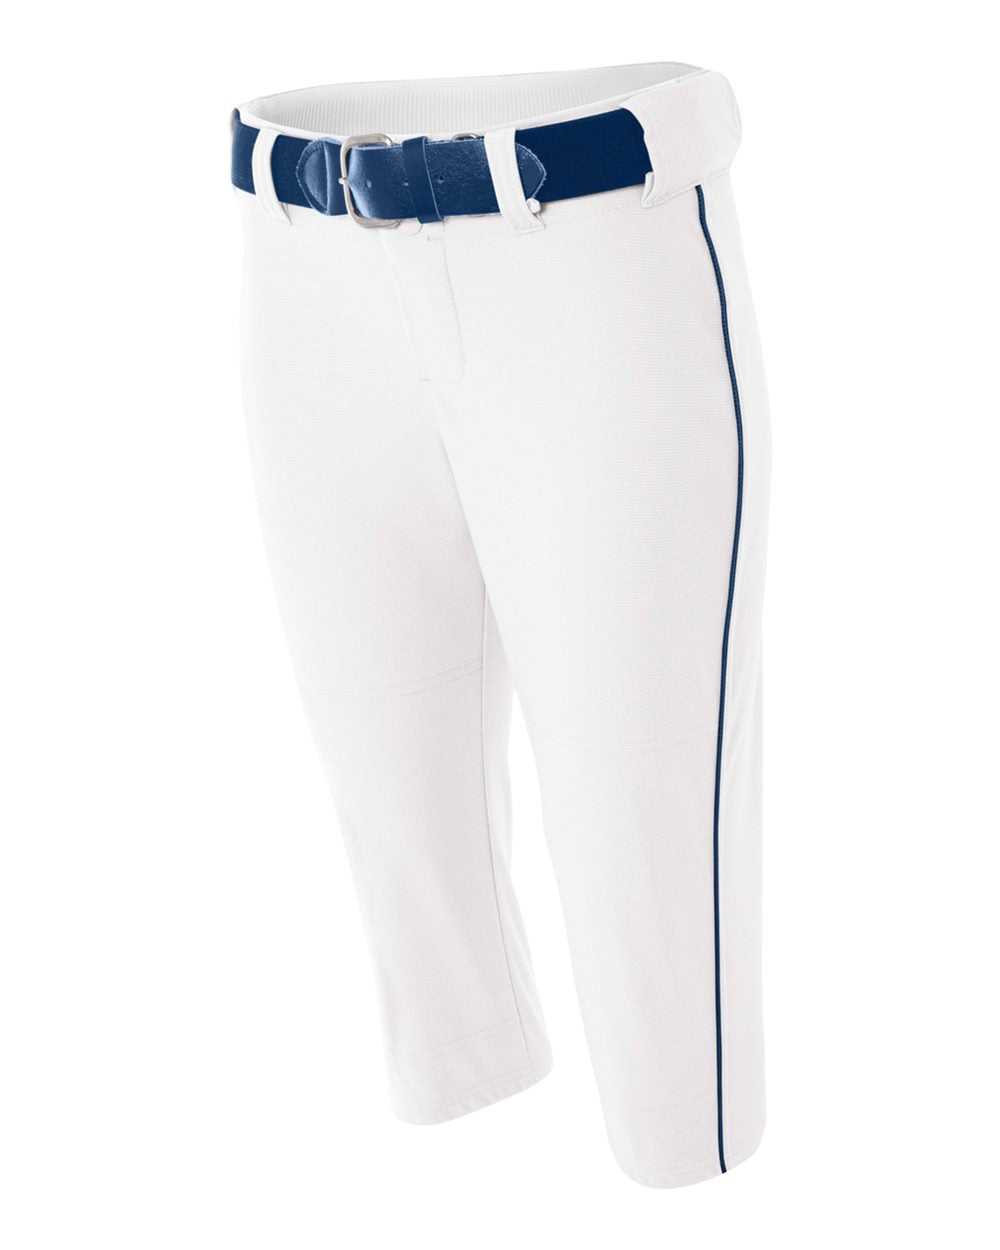 A4 NW6188 Womens Softball Pant with Cording - White Navy